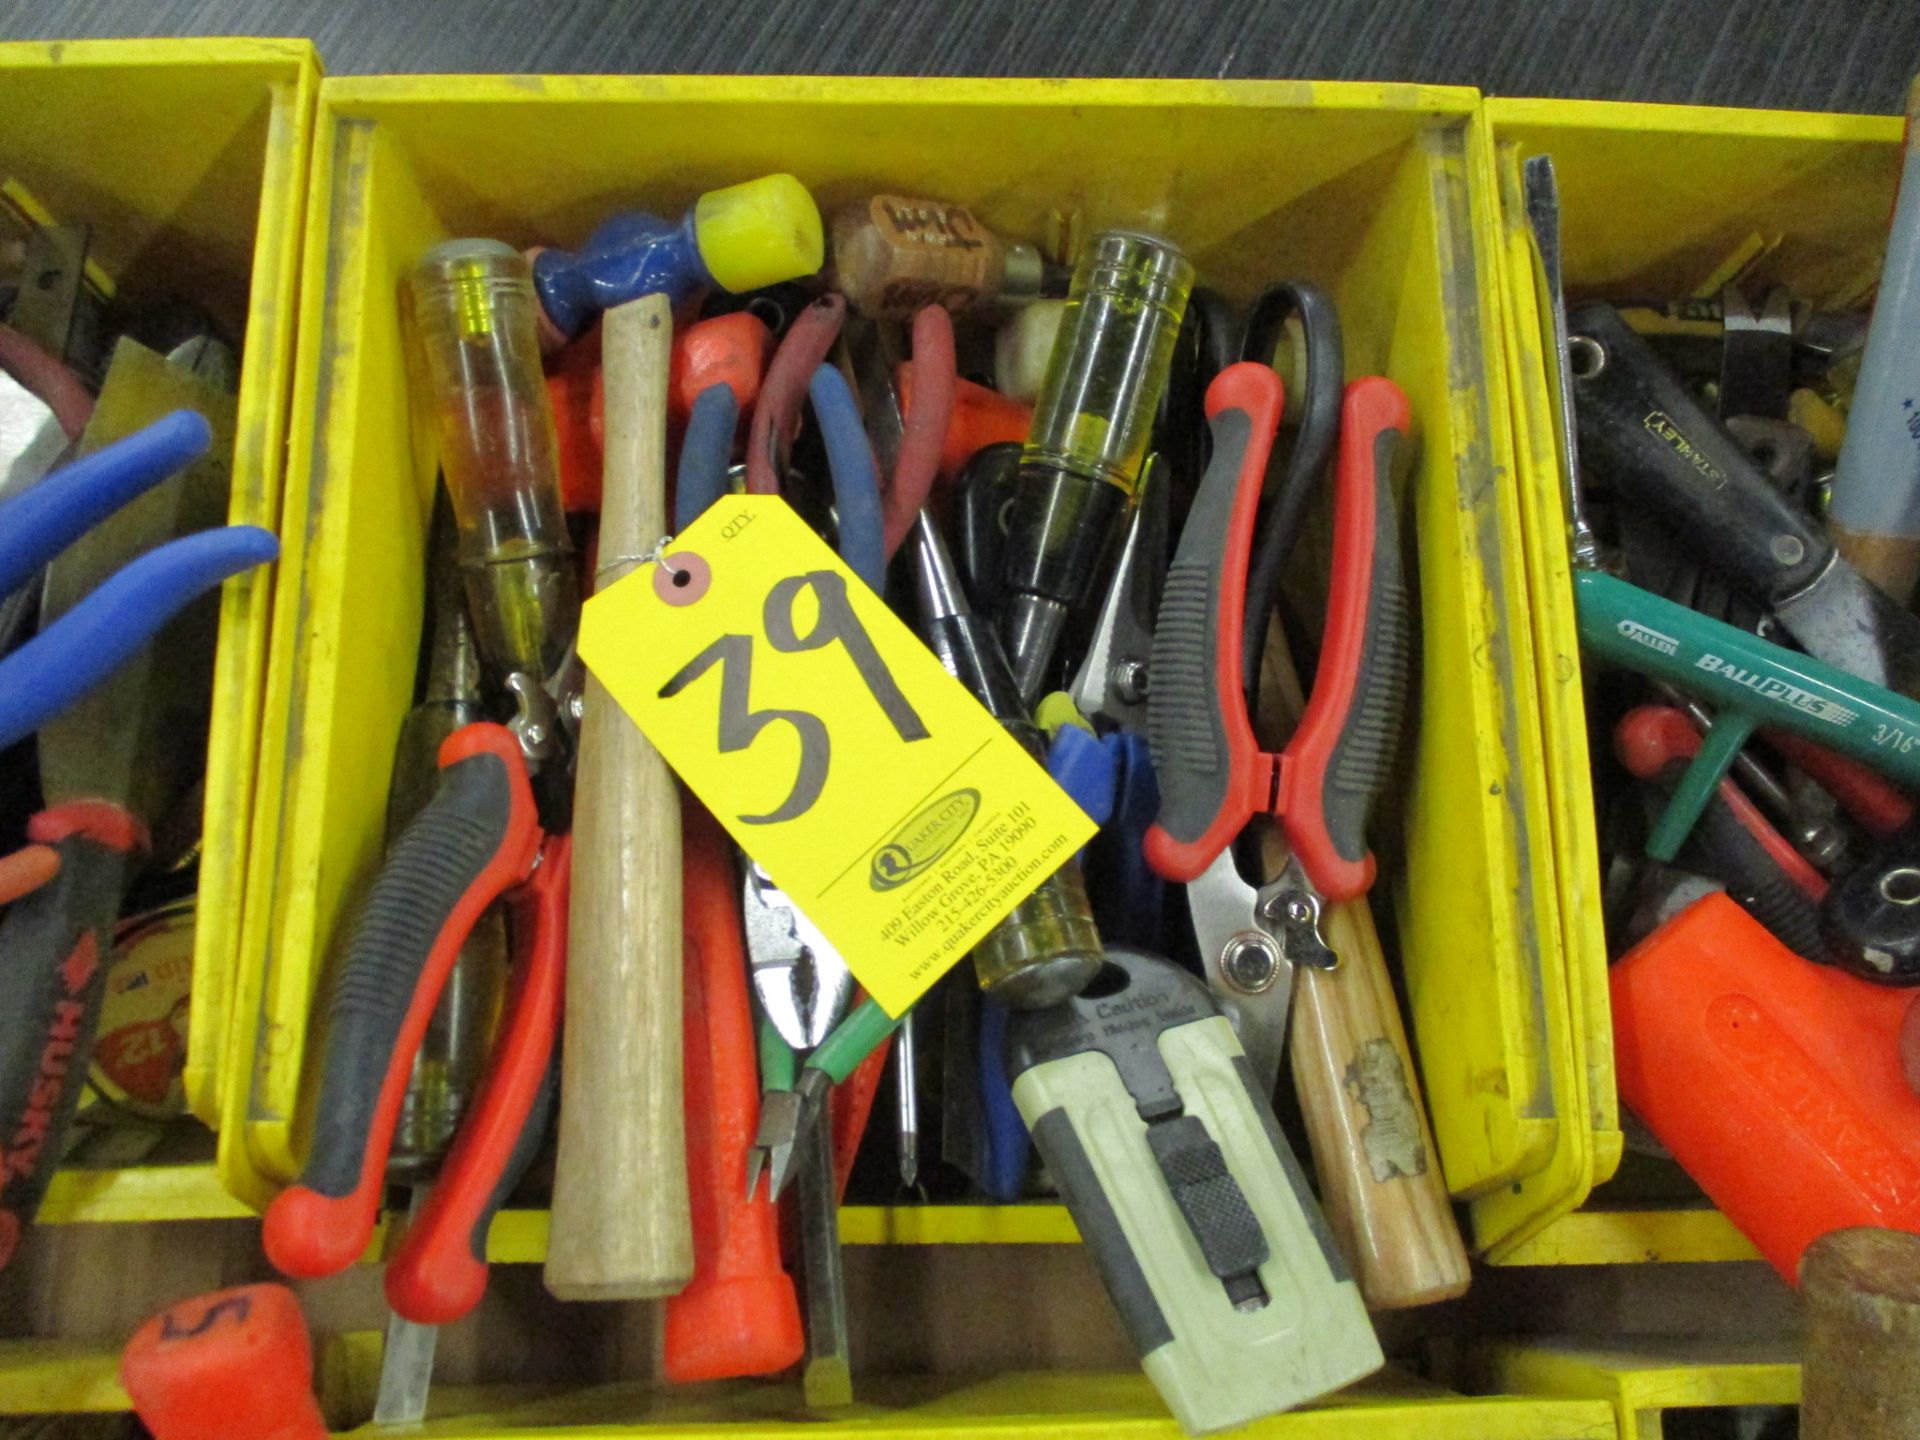 Assorted Hand Tools including Hammers, Screw Drivers, Putty Knives, Utility Knives, Pliers, Snips, T - Image 2 of 2